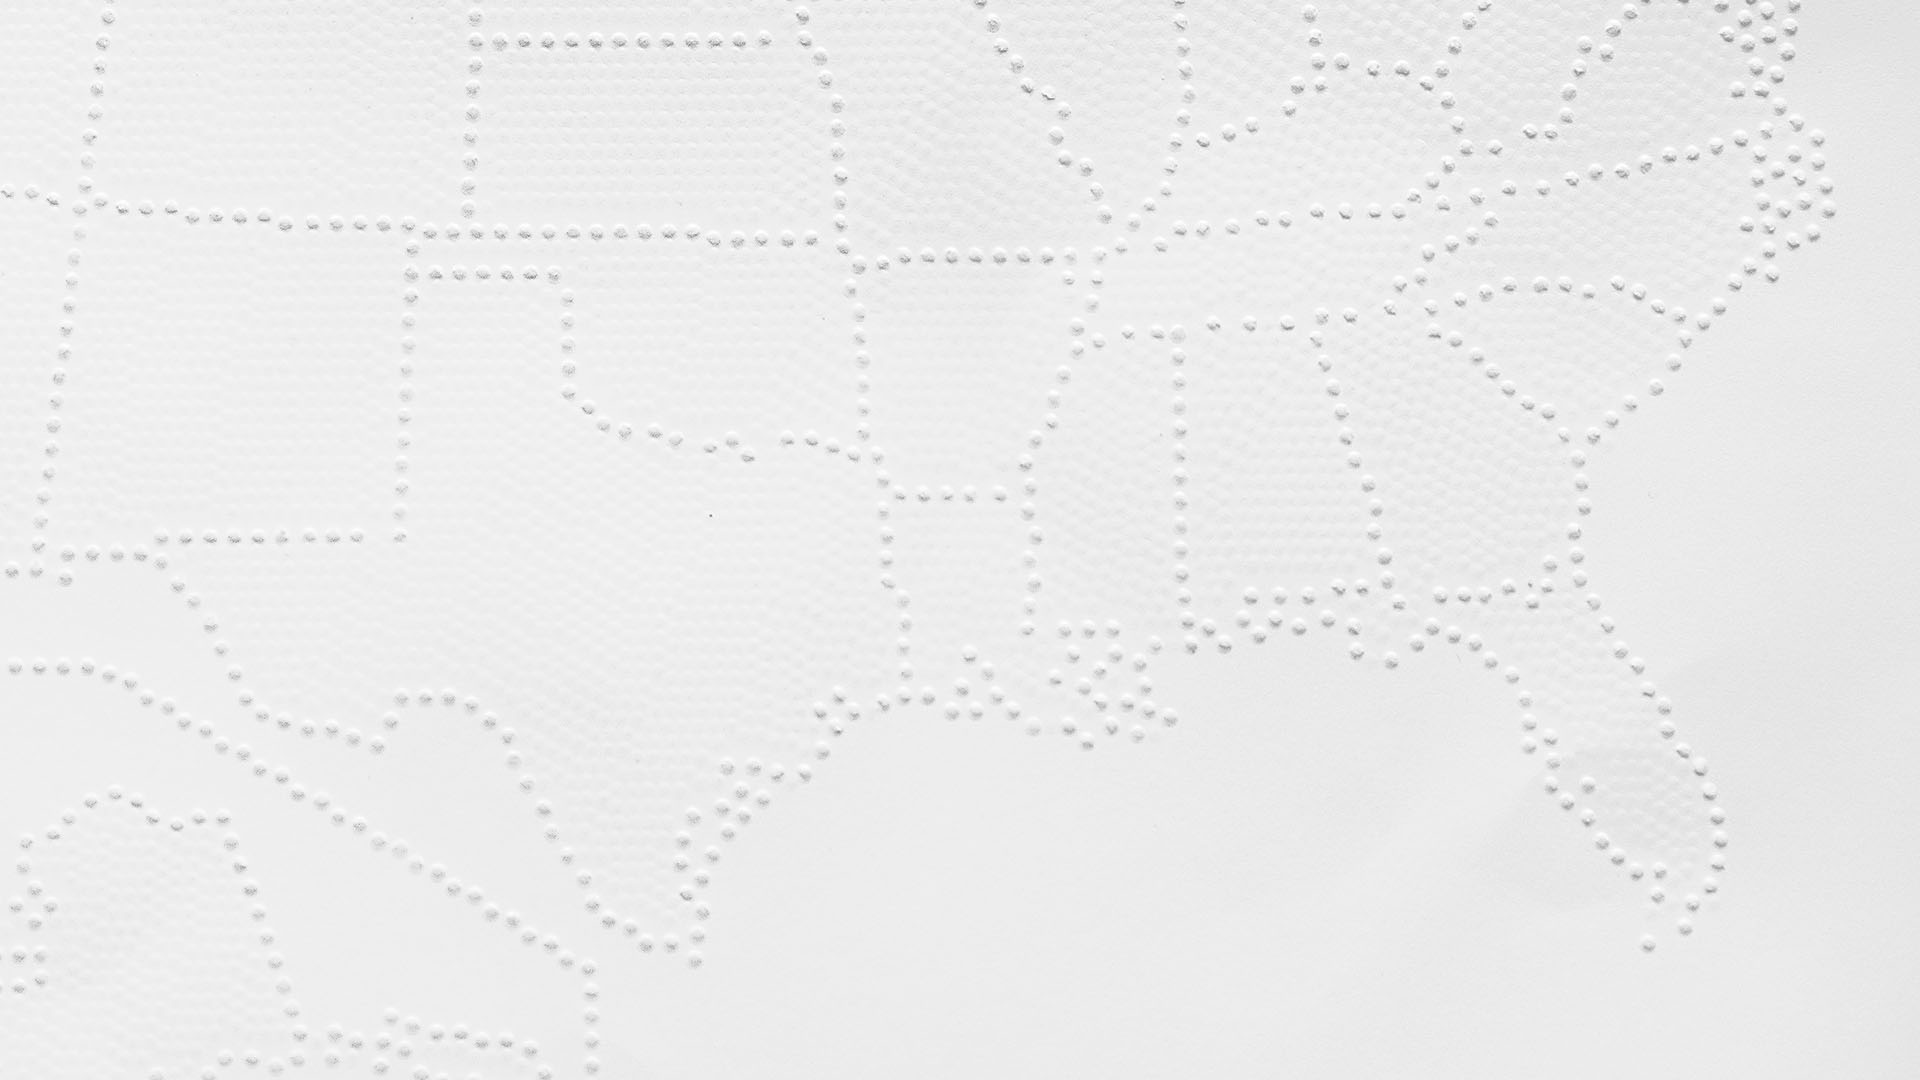 Close up photo of an embossed tactile graphic of a map of the southeastern US states. The lines between states are high relief dots while the areas within the states are low relief dots.